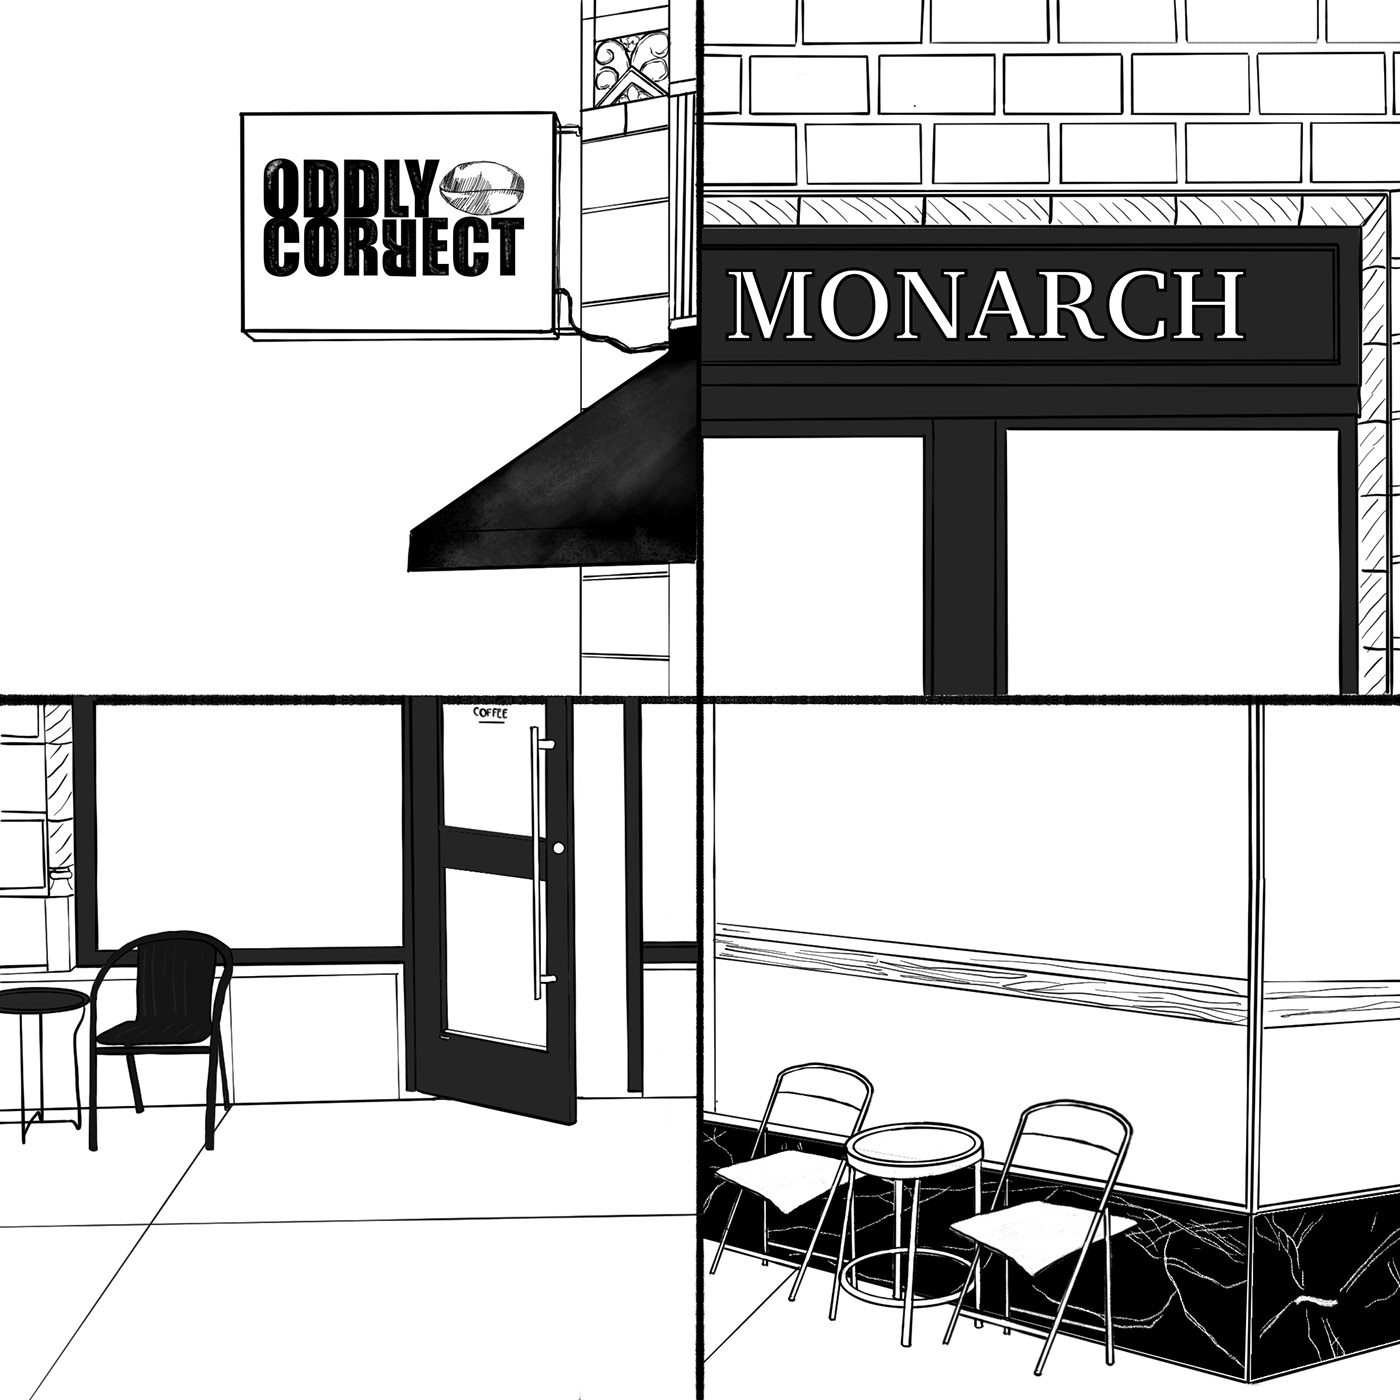 cafe Coffee coffeeshop monarch coffee ODDLY correct Procreate Storefront